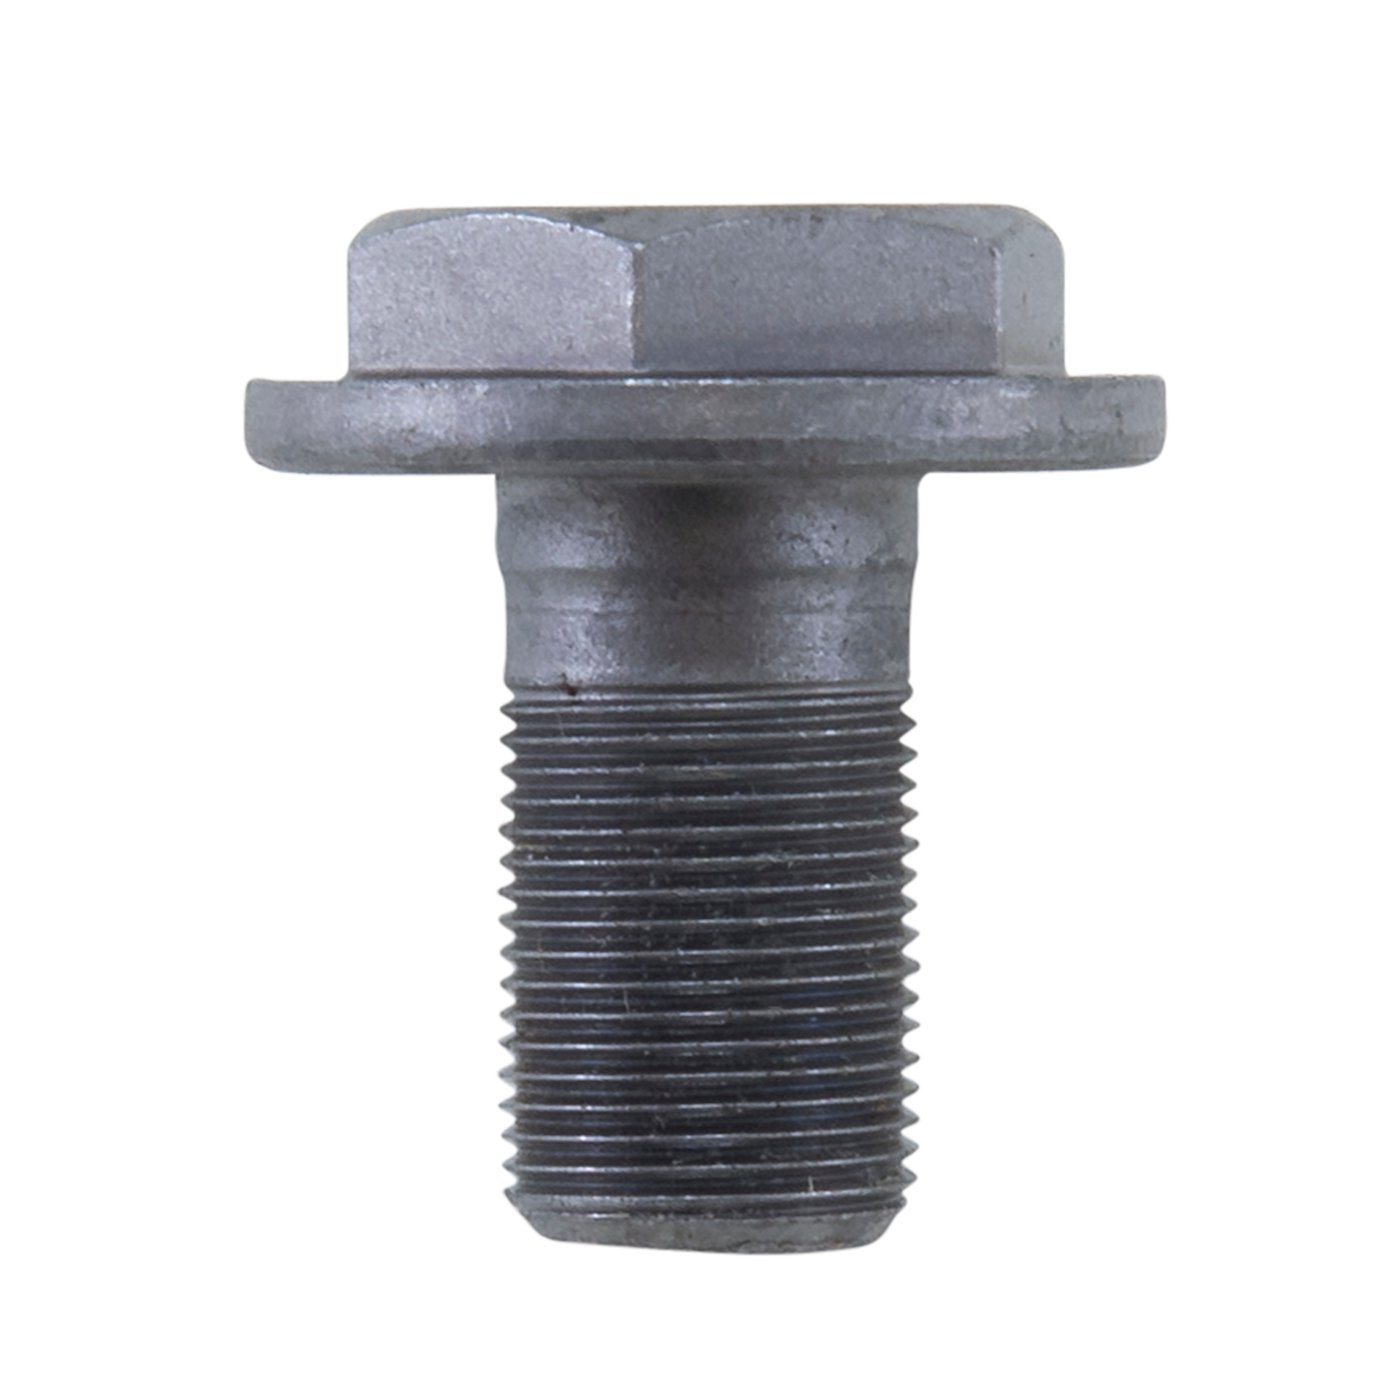 3/8 x 1-3/4 Pinion Support Bolt for Safety Wire with pully quantity 3.